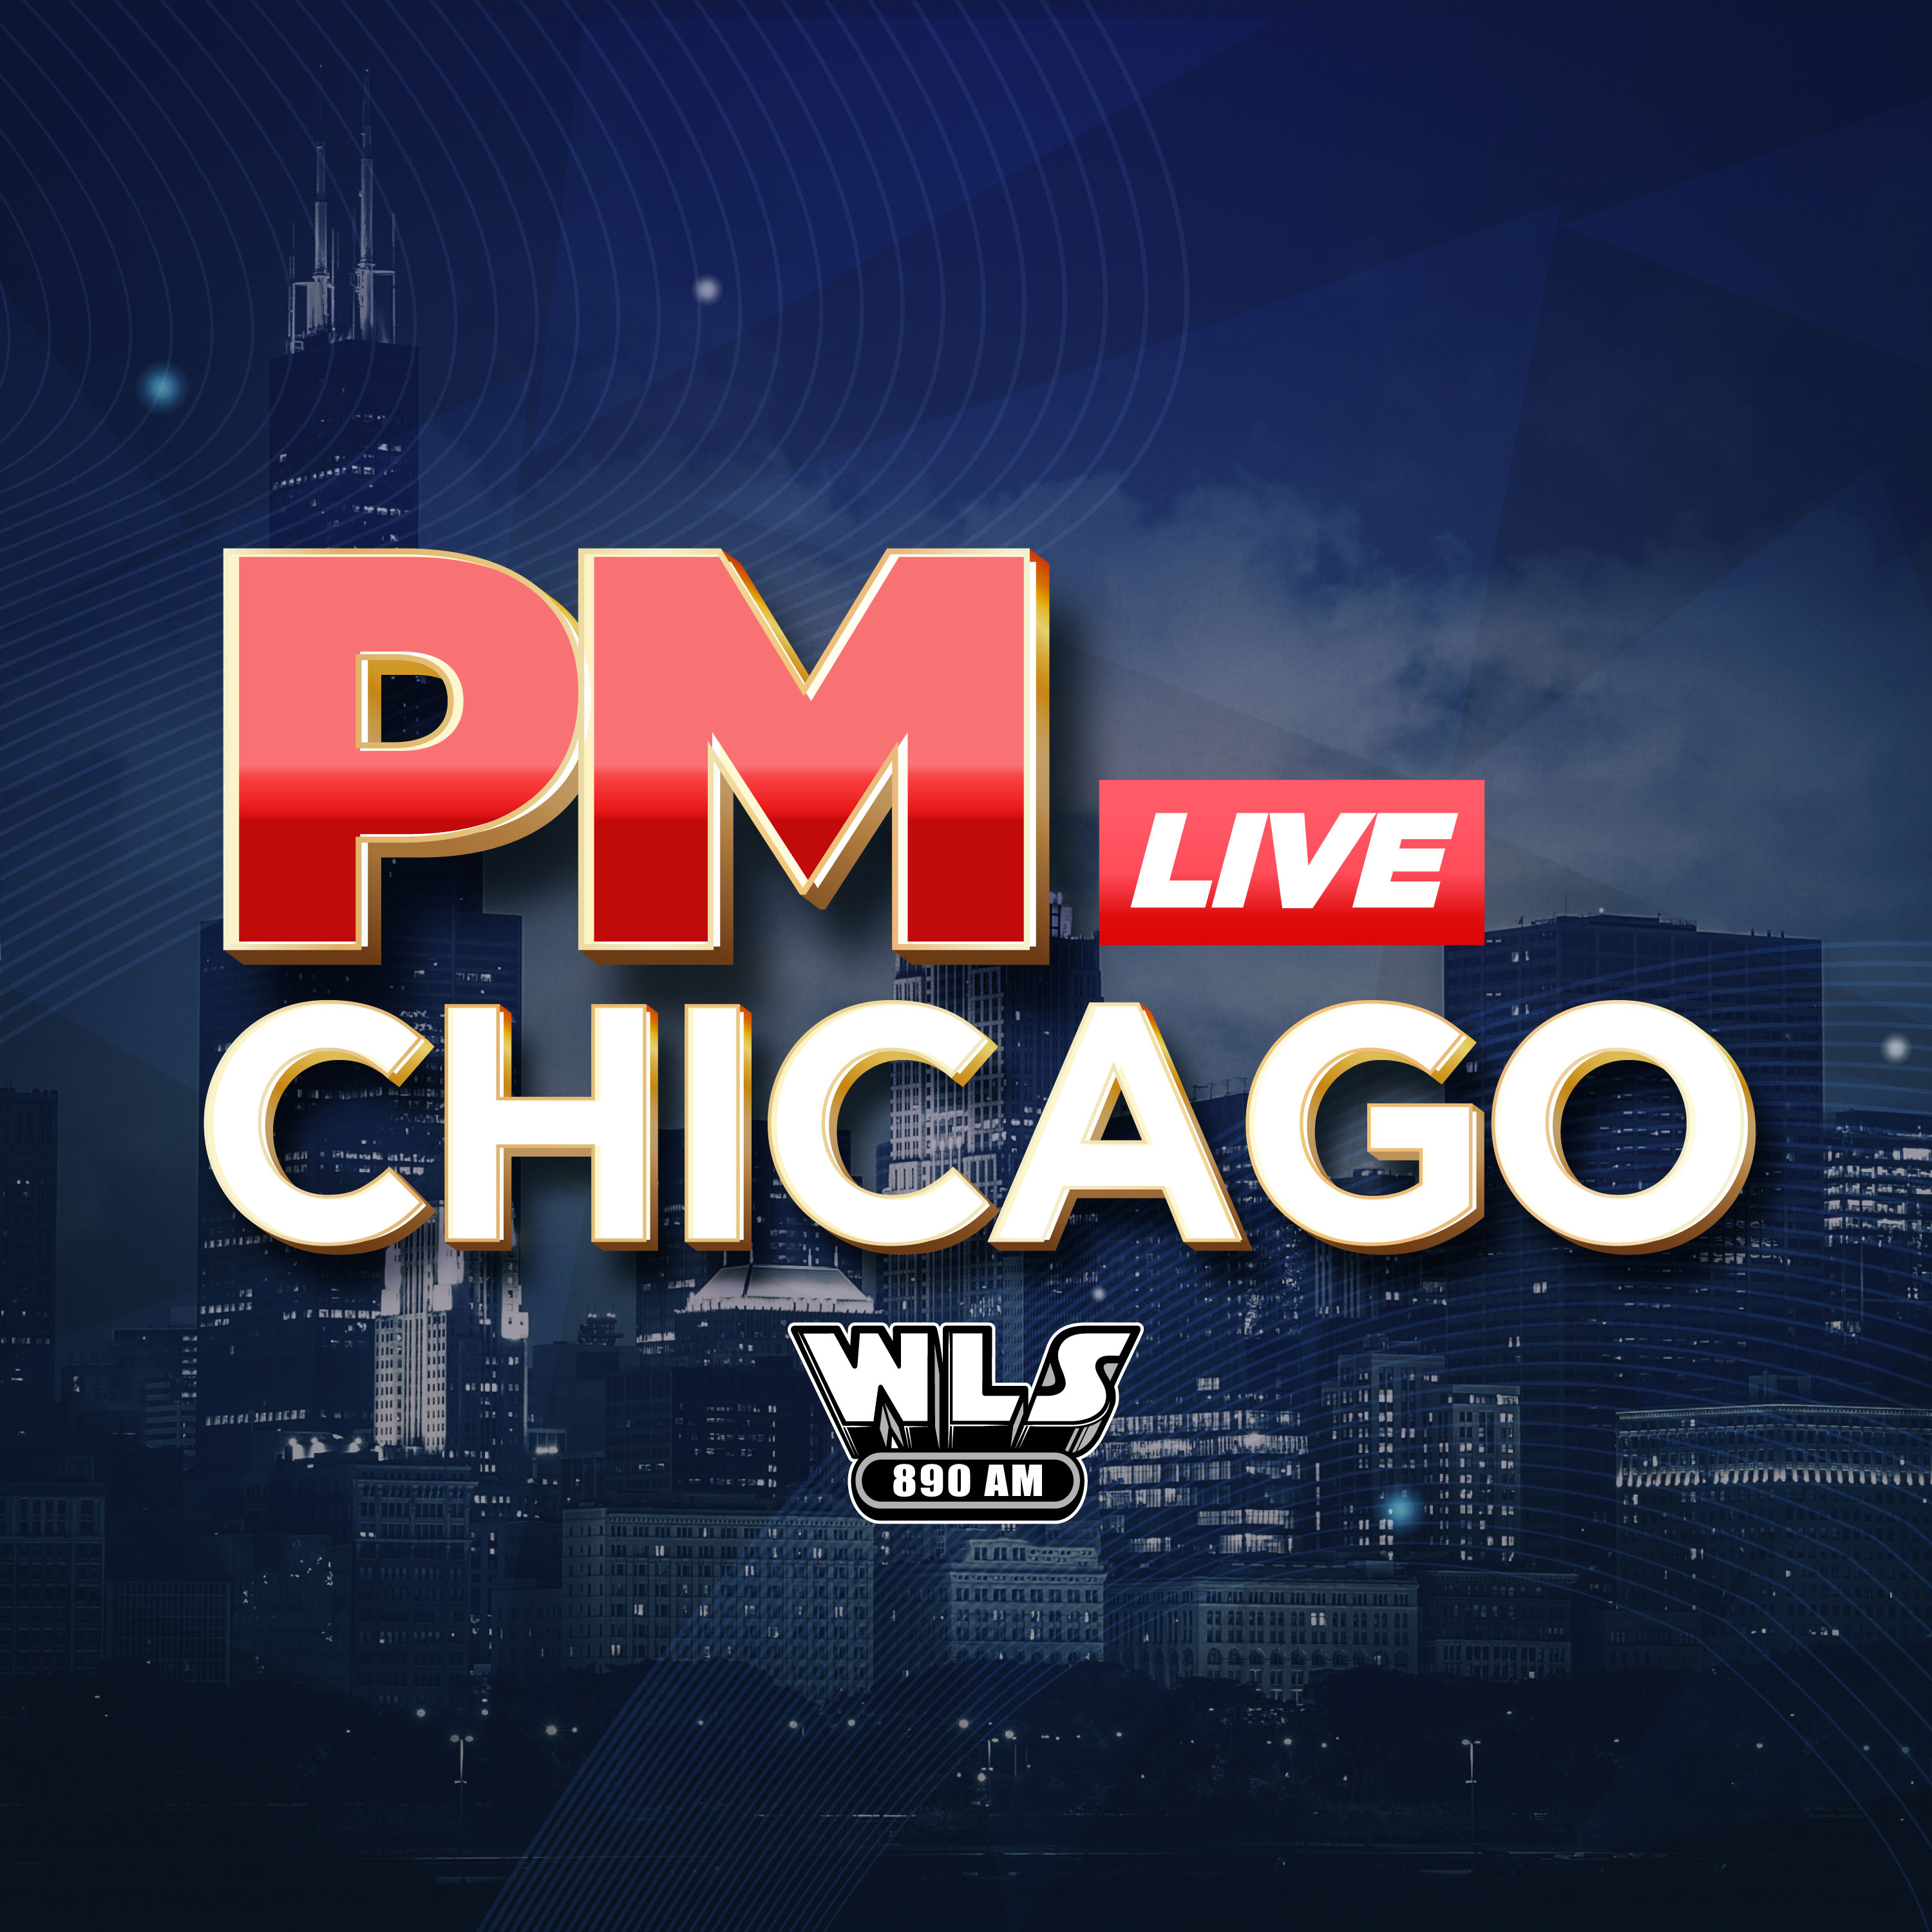 PM Chicago (5/28) - Bus Rides During the DNC + Johnson’s Summer Safety Plan